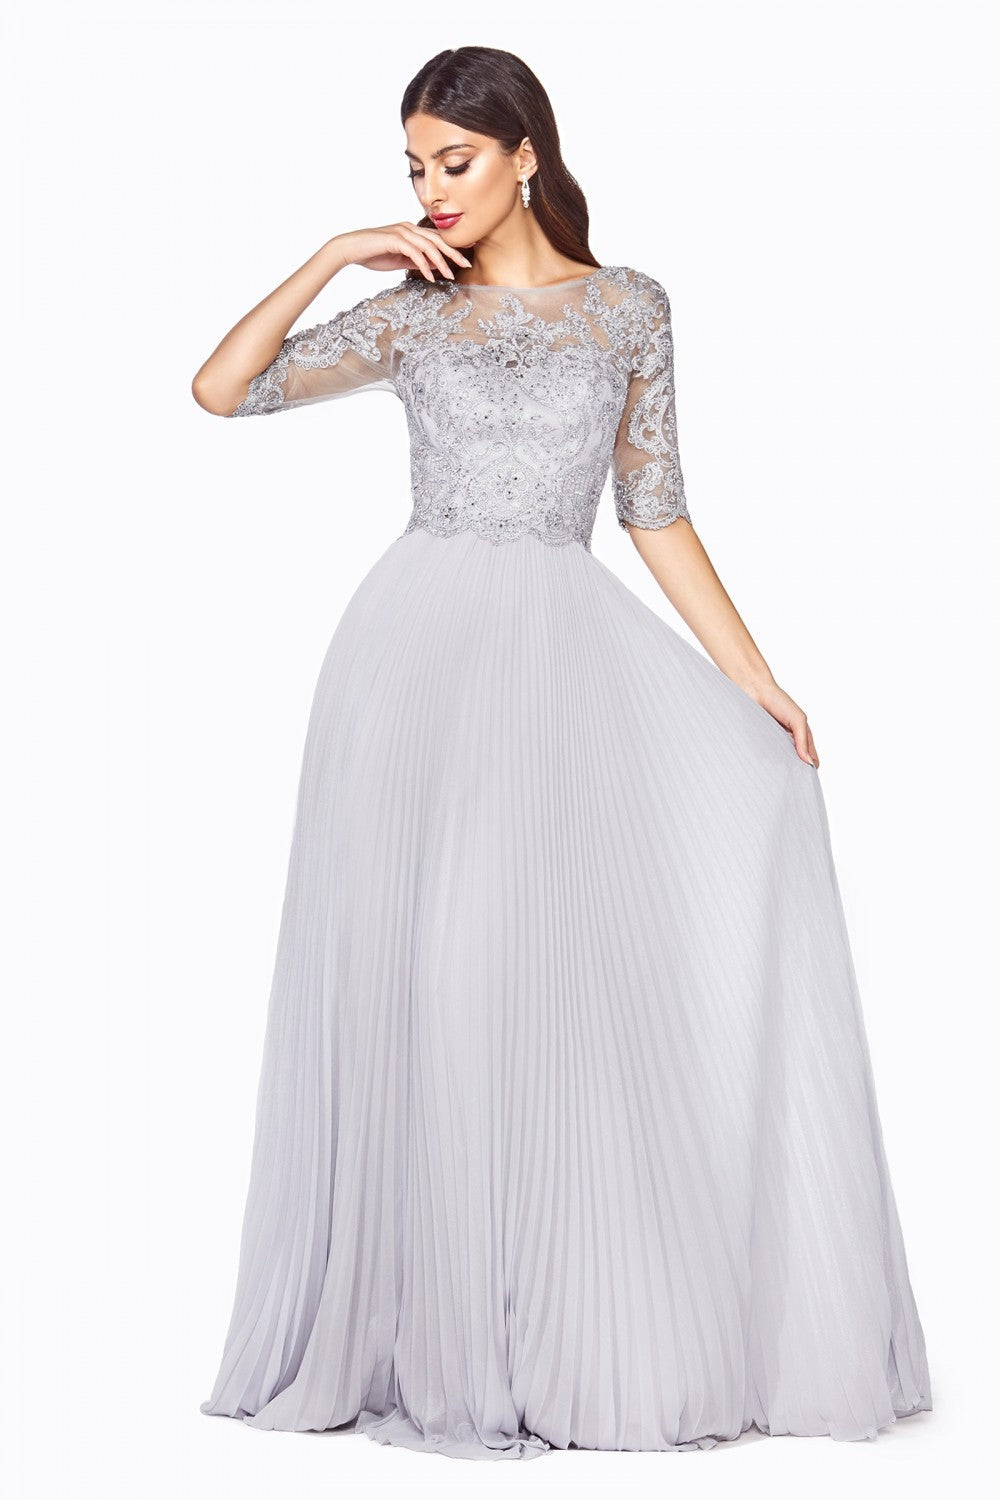 A-line dress with pleated chiffon skirt and lace three-quarter sleeve bodice. CDHT090 Elsy Style All Dresses